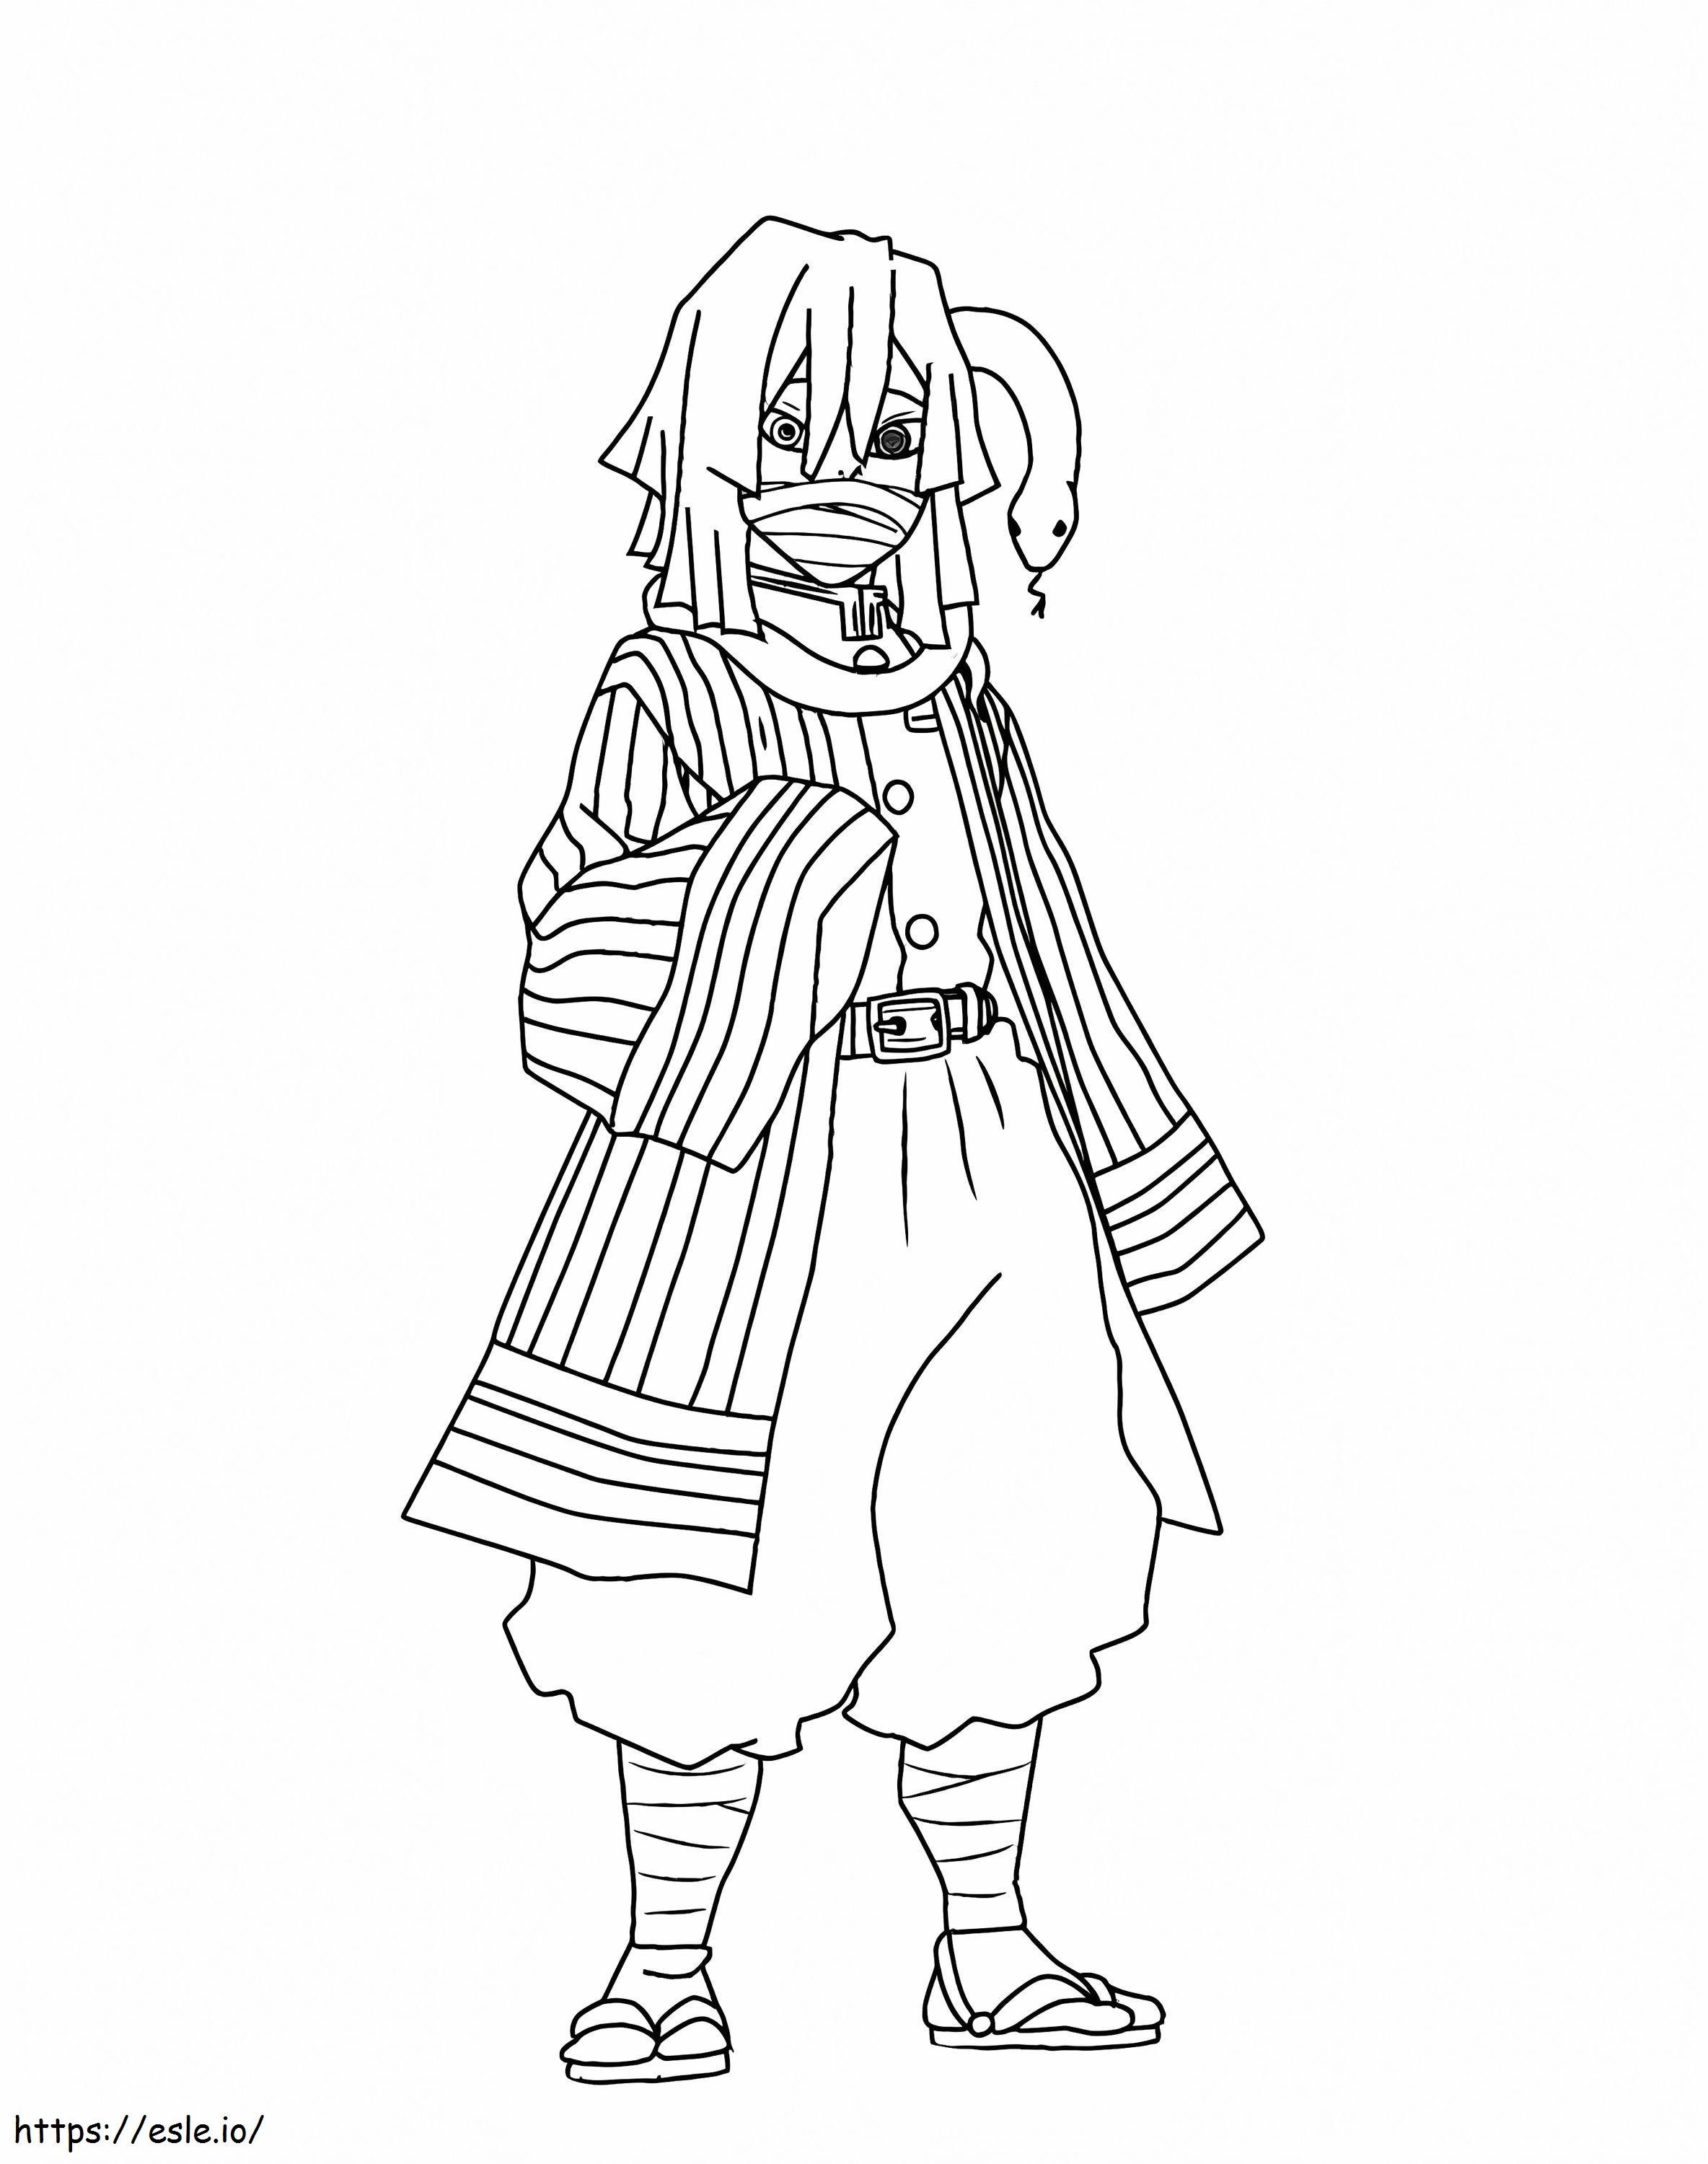 Obanai Iguro From Demon Slayer coloring page